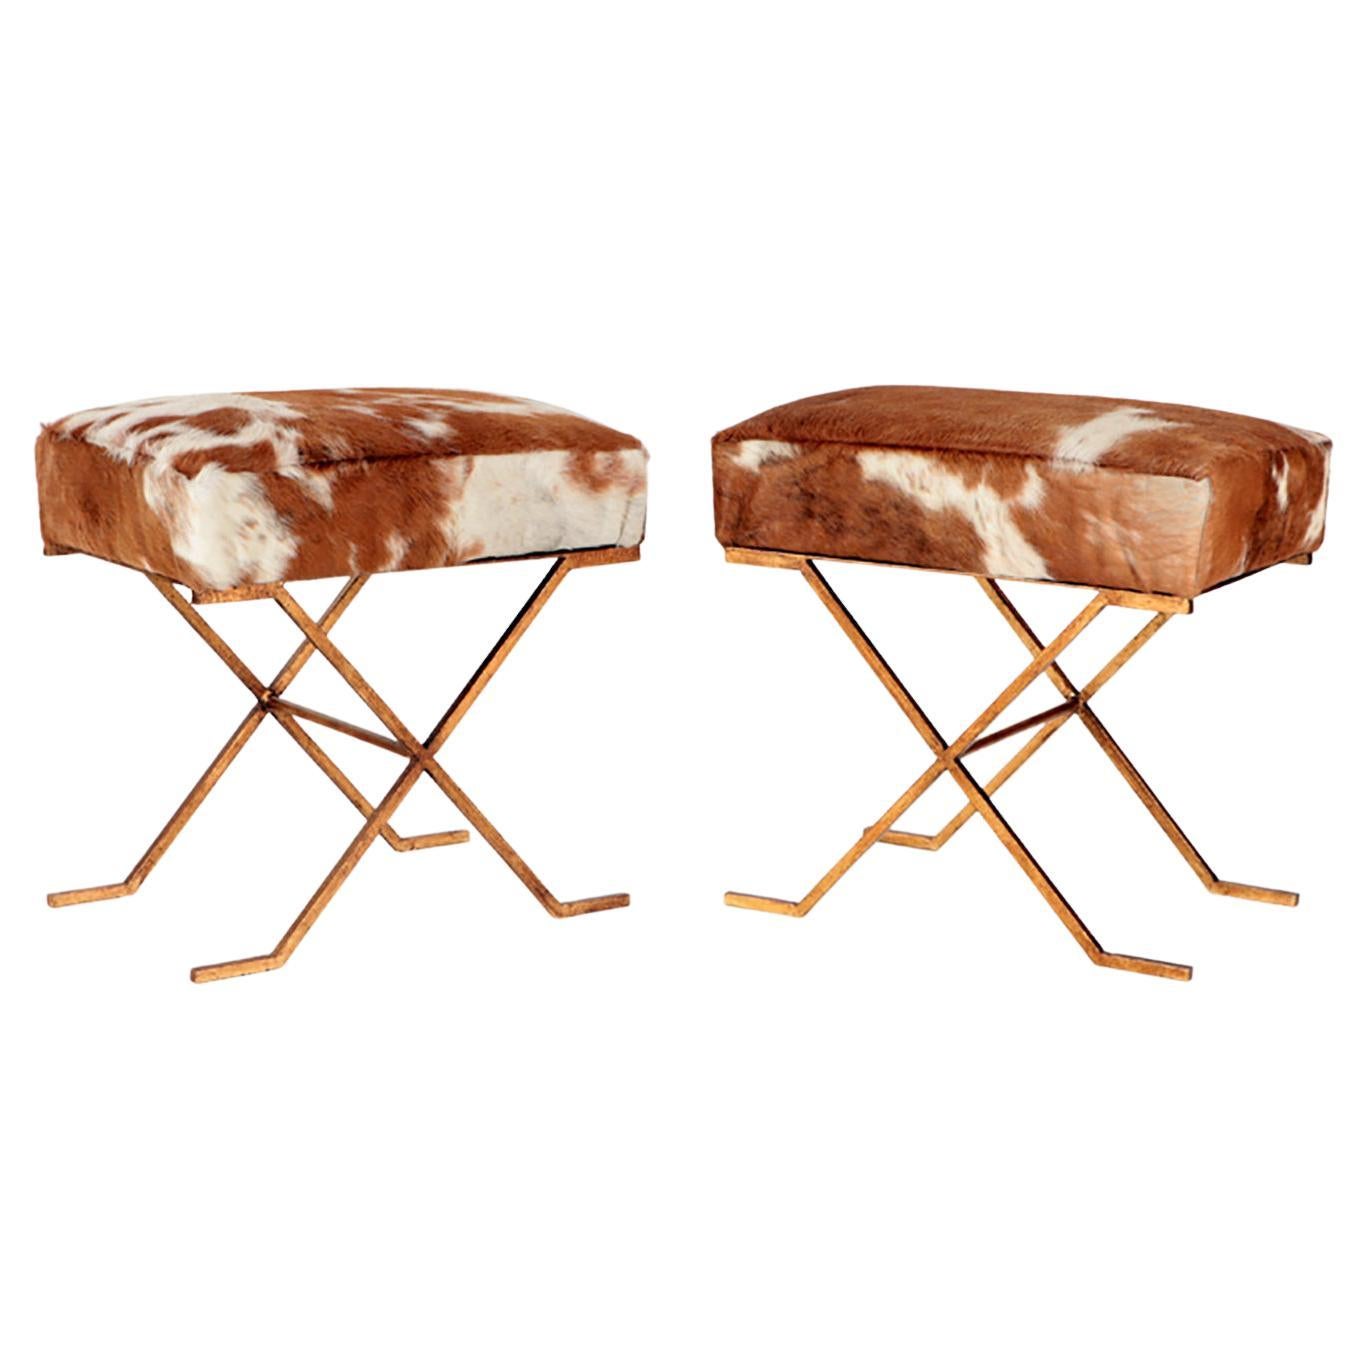 Pair Gilt-iron Cowhide X-frame Benches in the Jean-Michel Frank Manner